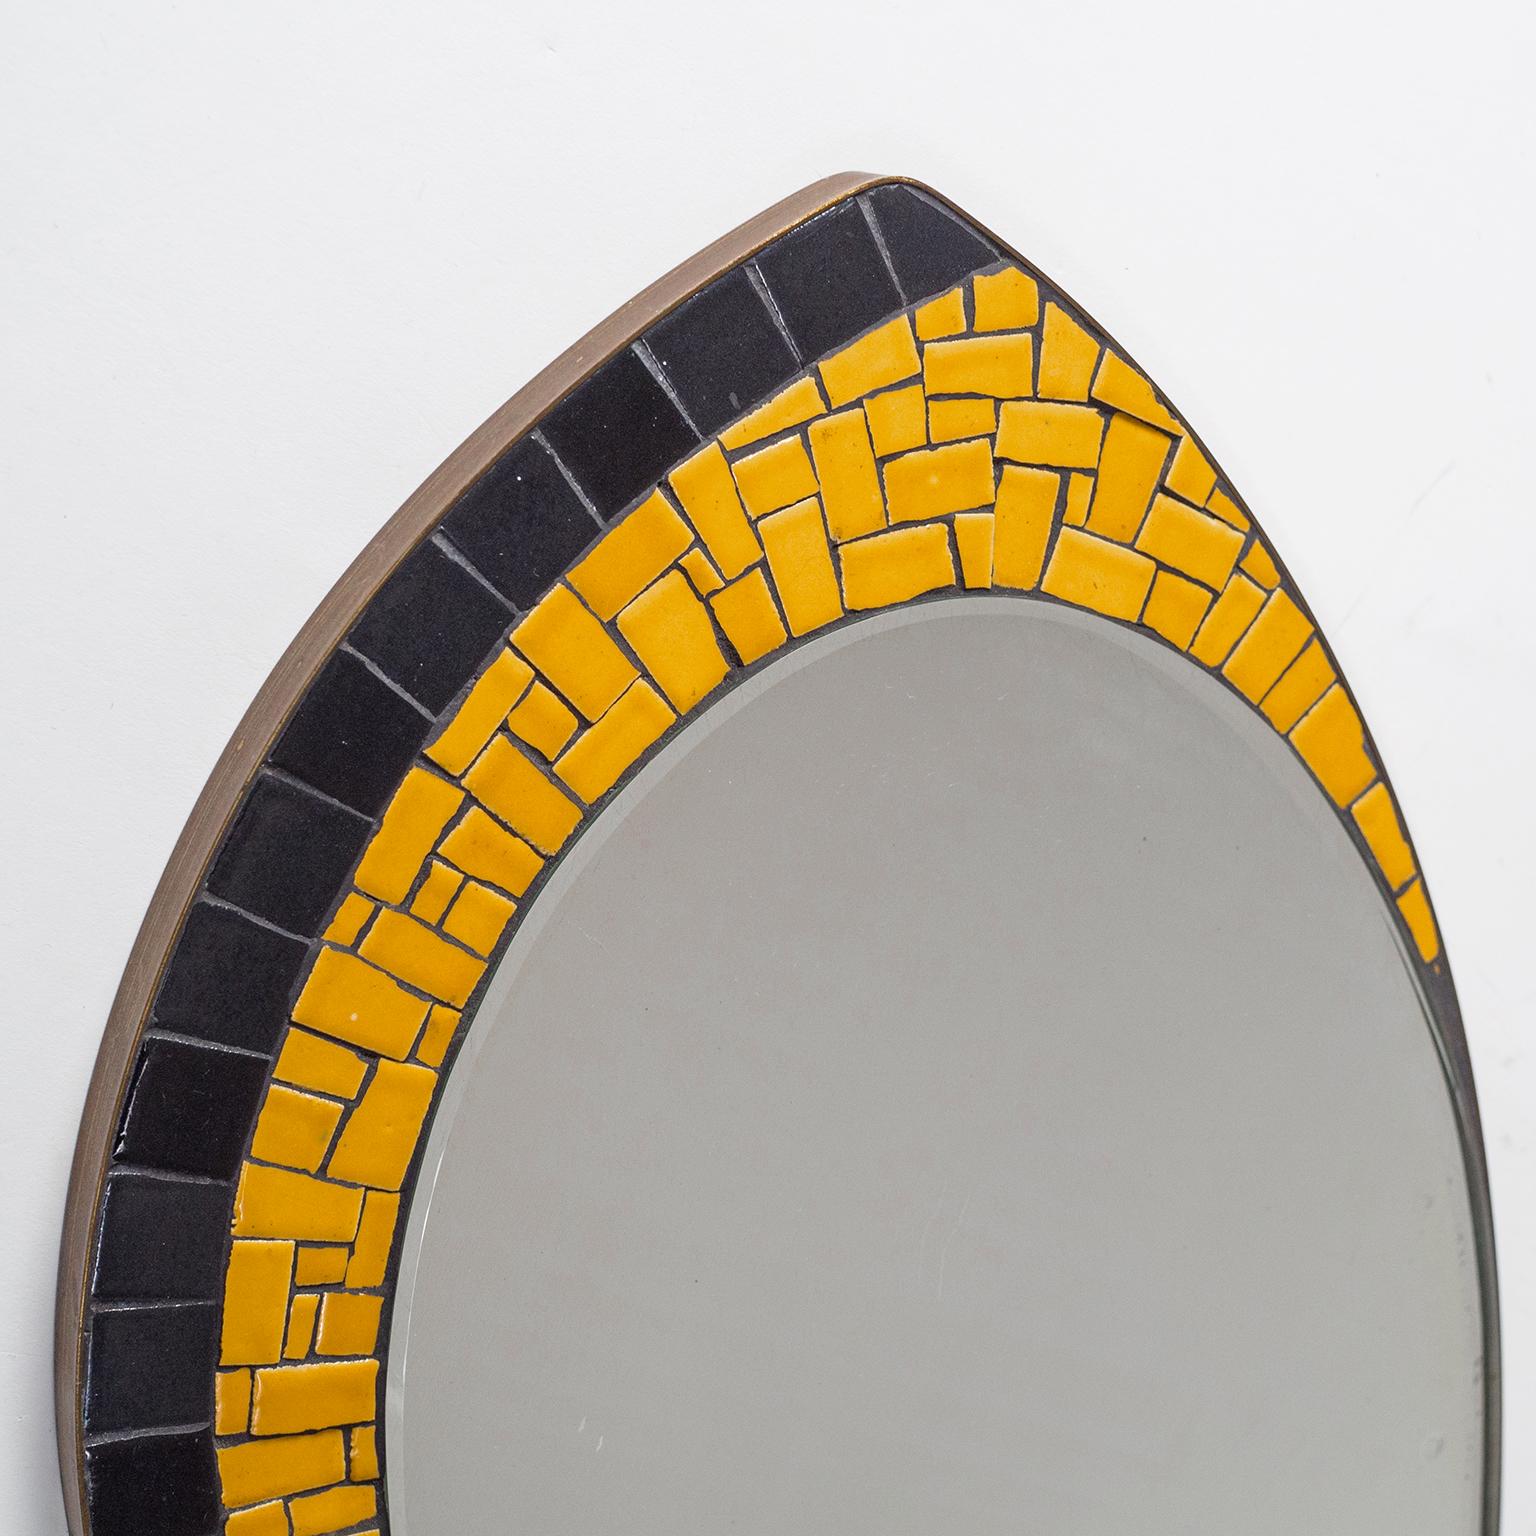 Charming midcentury oval brass and mosaic mirror, circa 1960. Solid continuous brass rim and an asymmetric ceramic mosaic in black and orange. Fine original condition with patina on the brass and some wear to the silver coating of the original